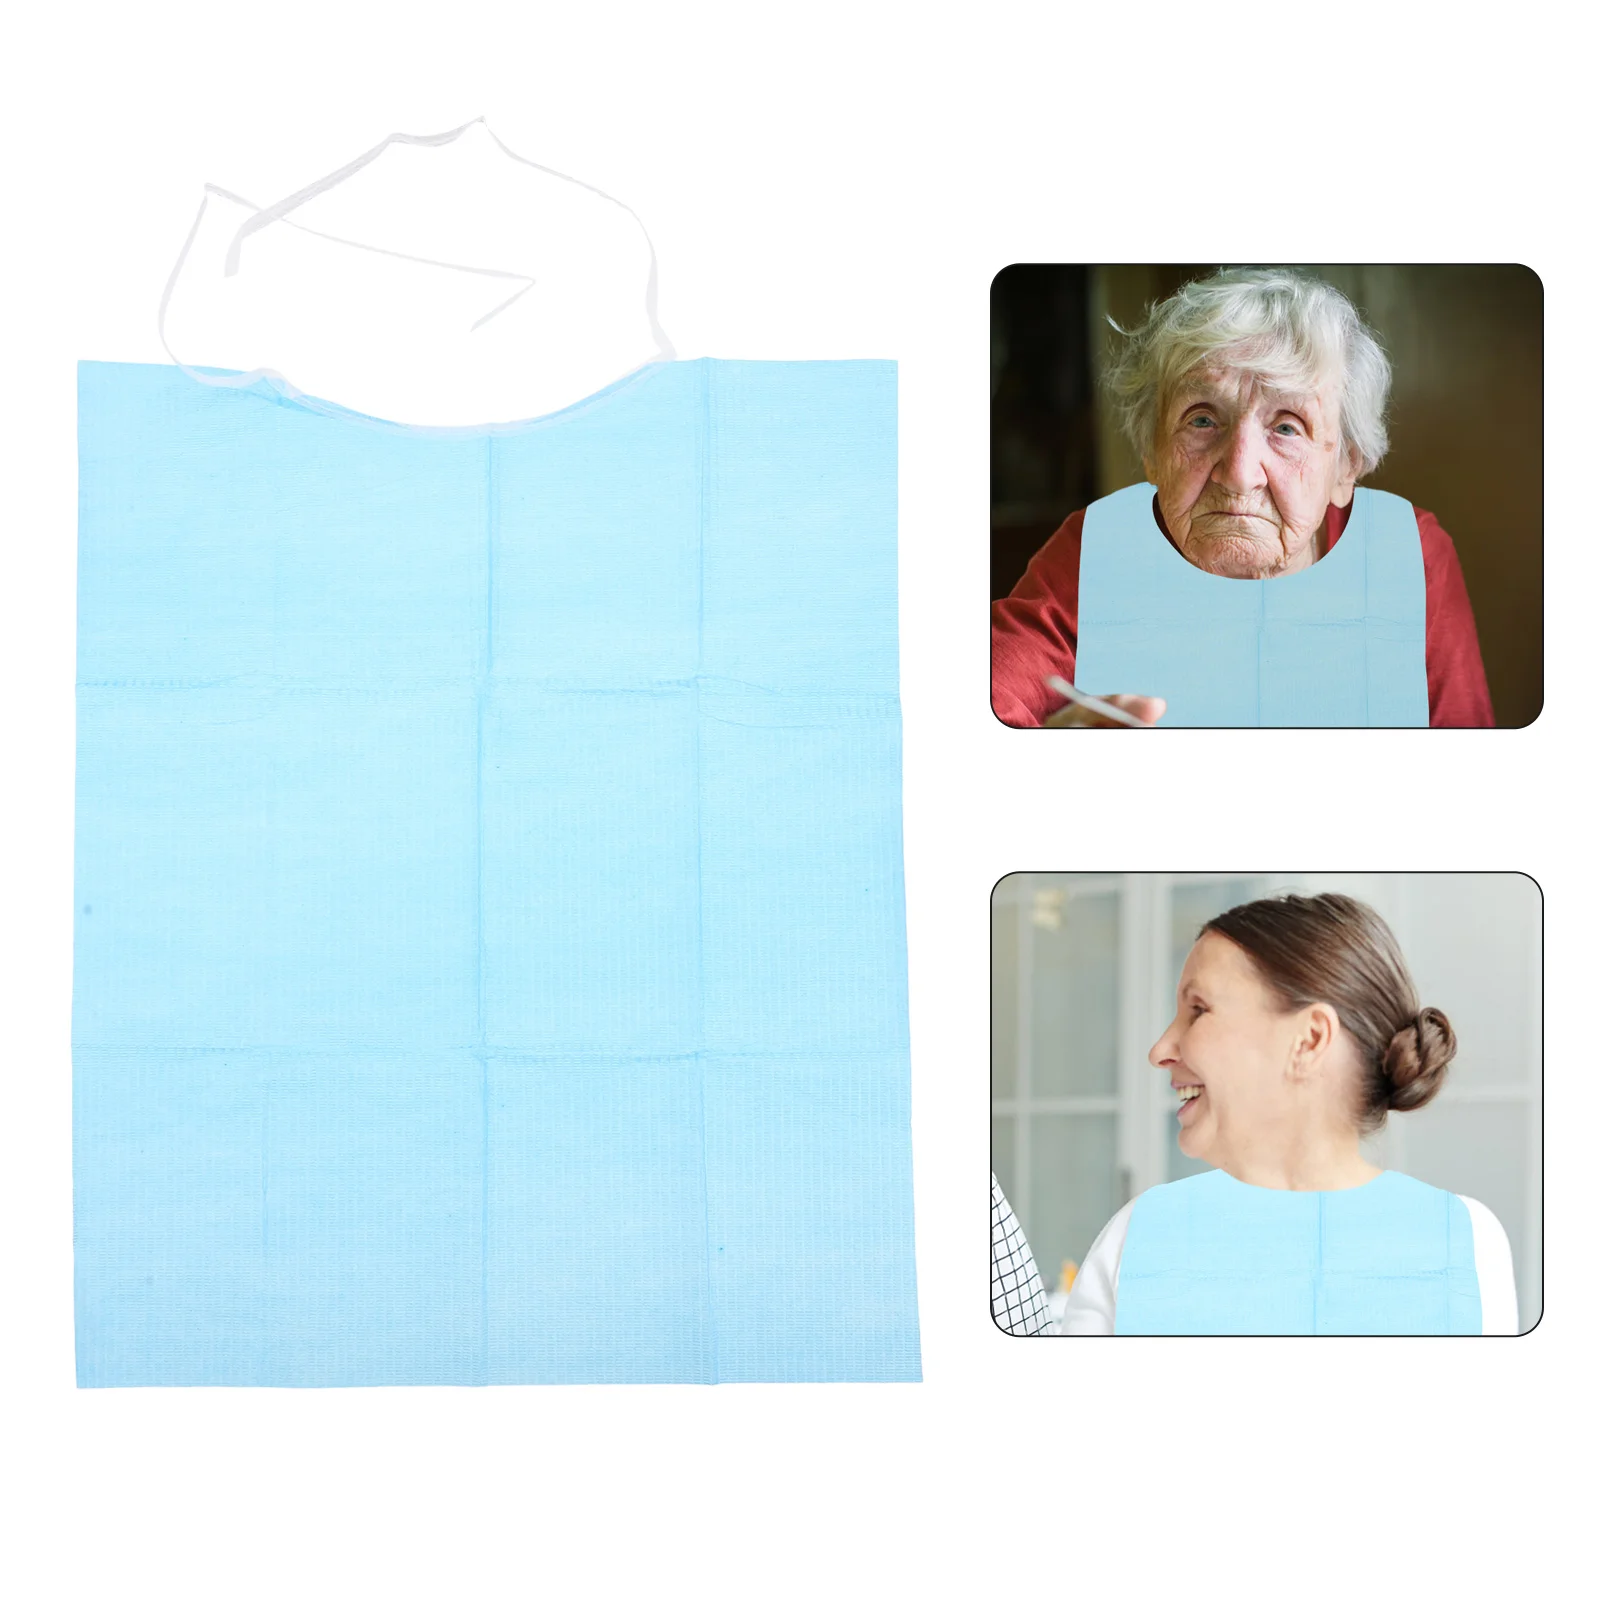 

Bibs Adult Bib Elderly Clothing Protectors Feeding Adults Eating Food Disability Disposable Senior Aprons Washable Mealtime